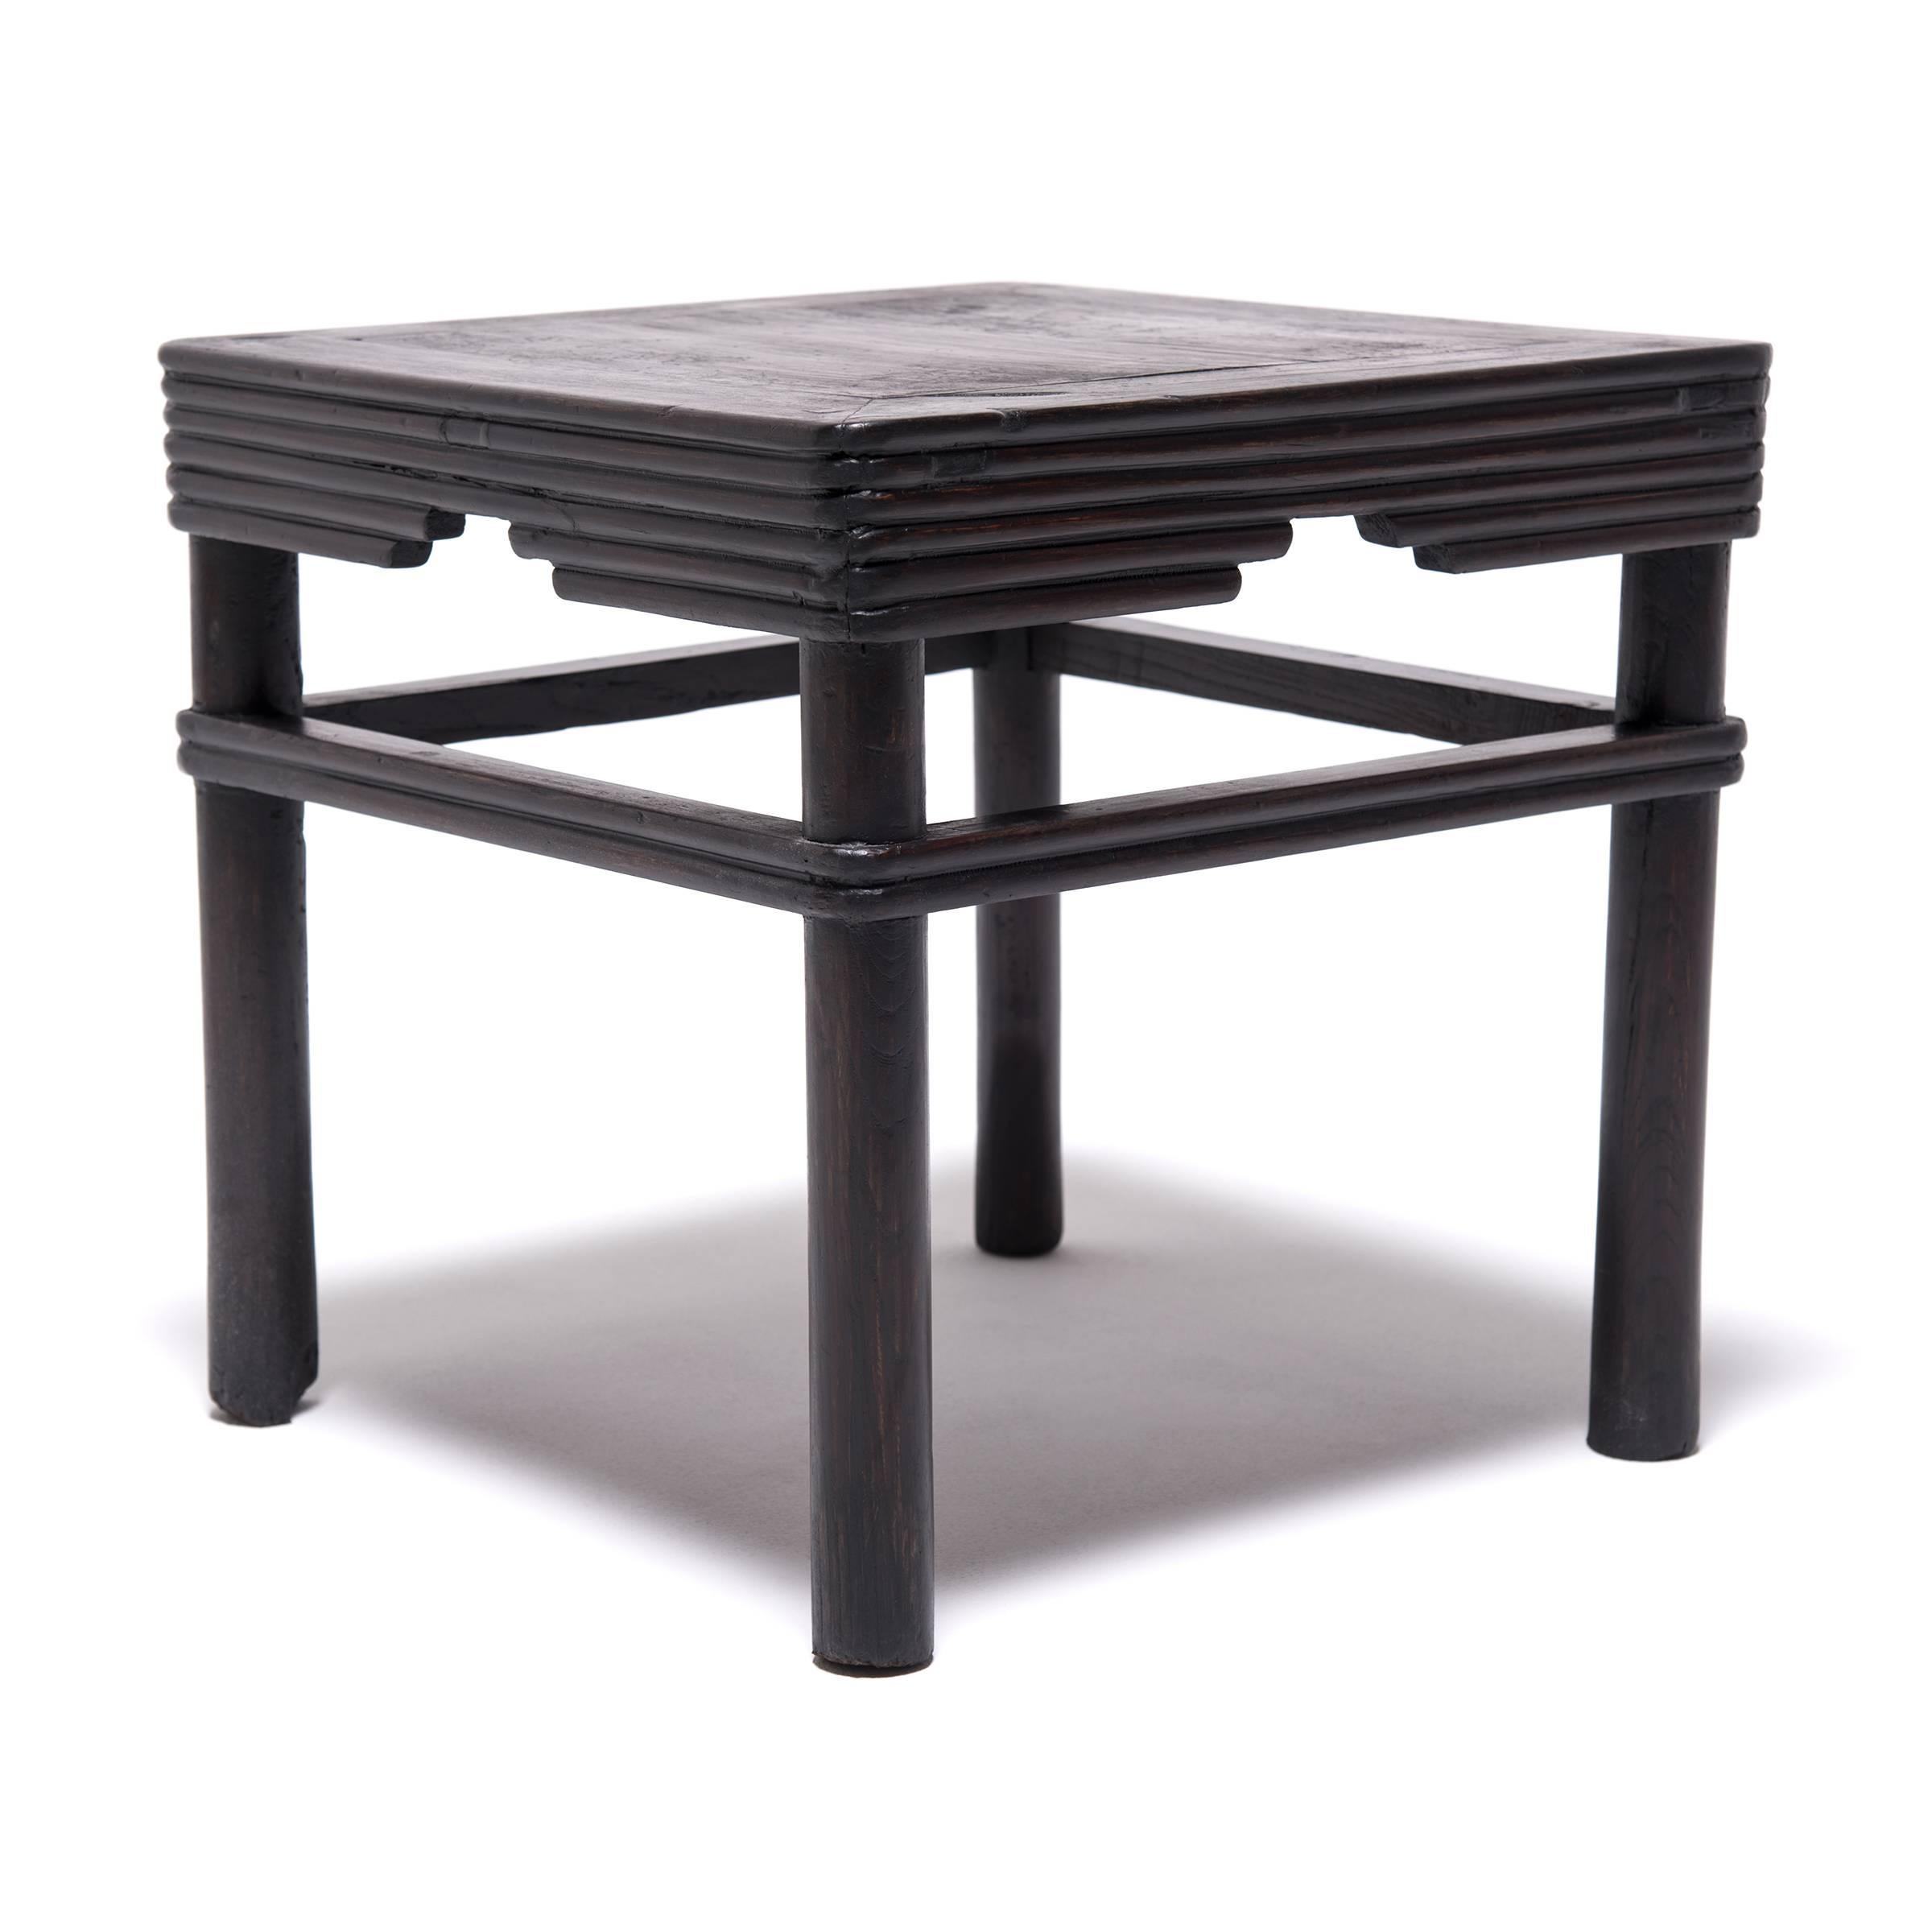 Paying tribute to the humble virtues of bamboo, ribbed woodwork wraps the legs and creates a stepped apron for this square stool, known as a fang deng. Expertly crafted from elm foraged from the forests of northern China, this stool was made in the